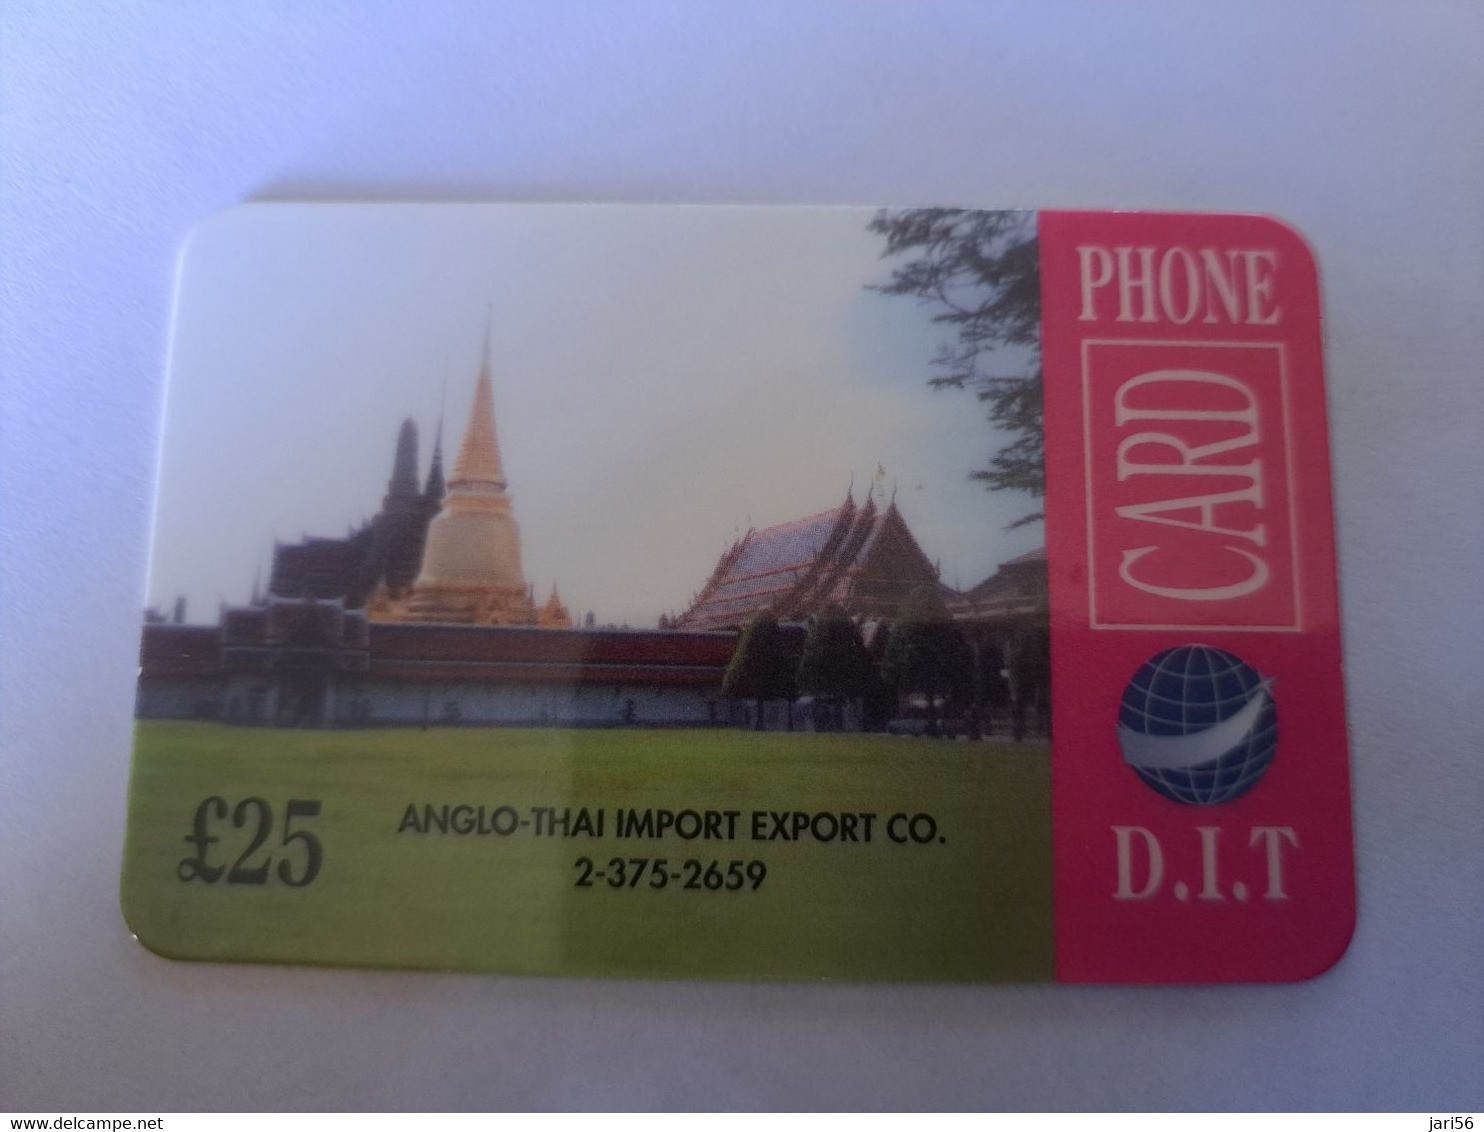 GREAT BRITAIN   25 POUND  / ANGLO- THAI IMPORT EXPORT  /    DIT PHONECARD    PREPAID CARD      **12124** - Collections